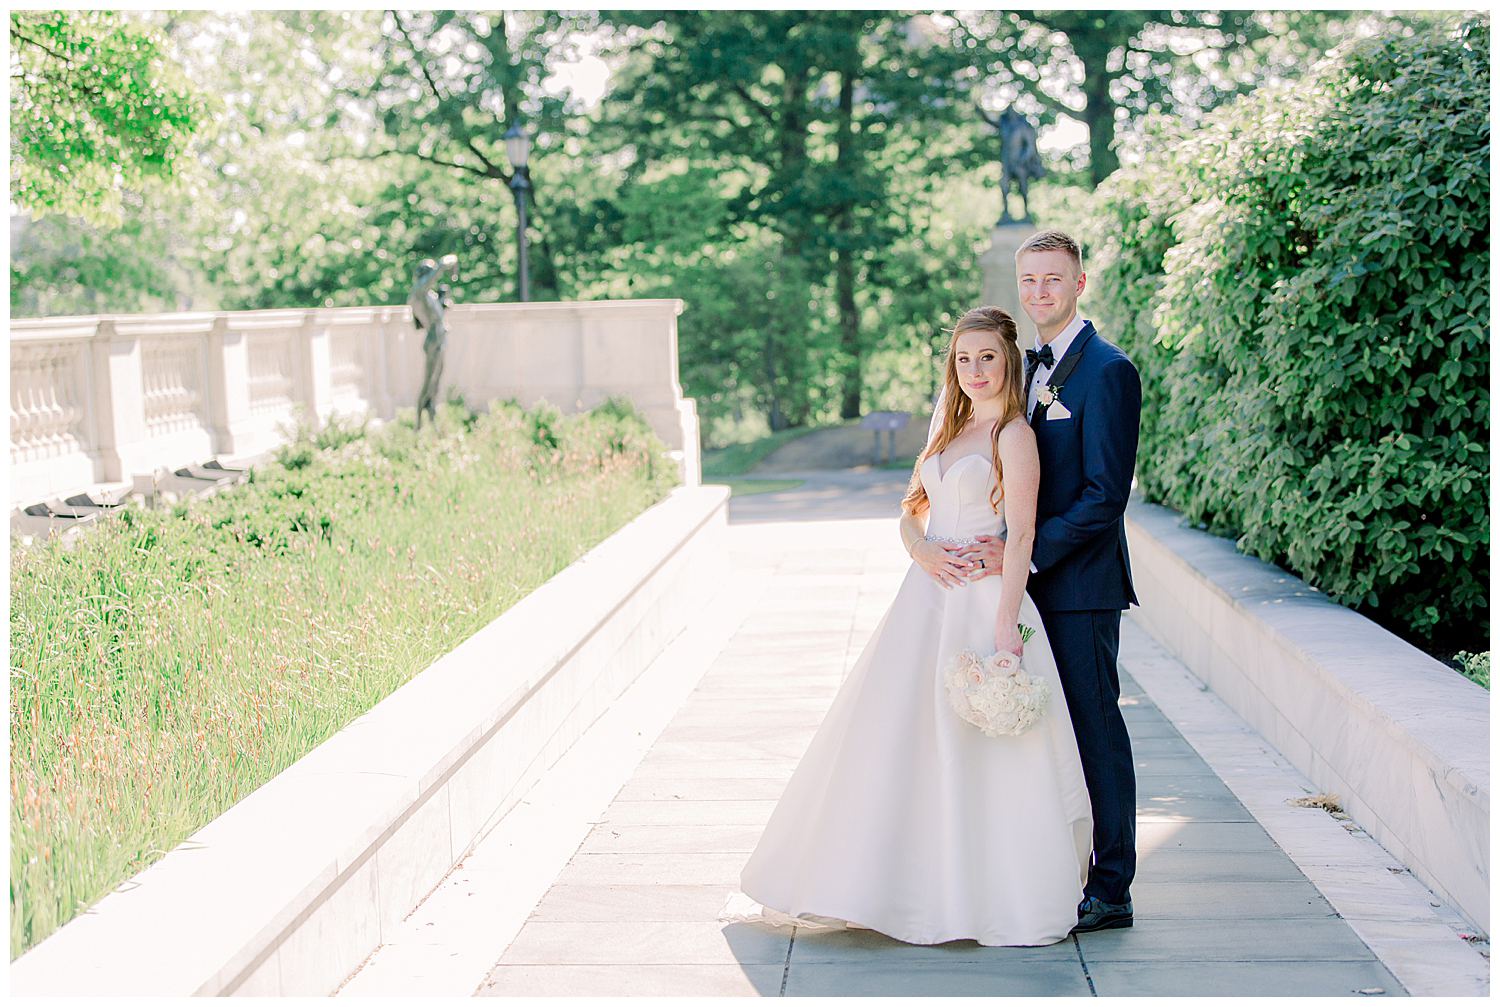 Walters_Cleveland_Museum_of_Art_Wedding_Portraits_Kate_Mannella_Photography